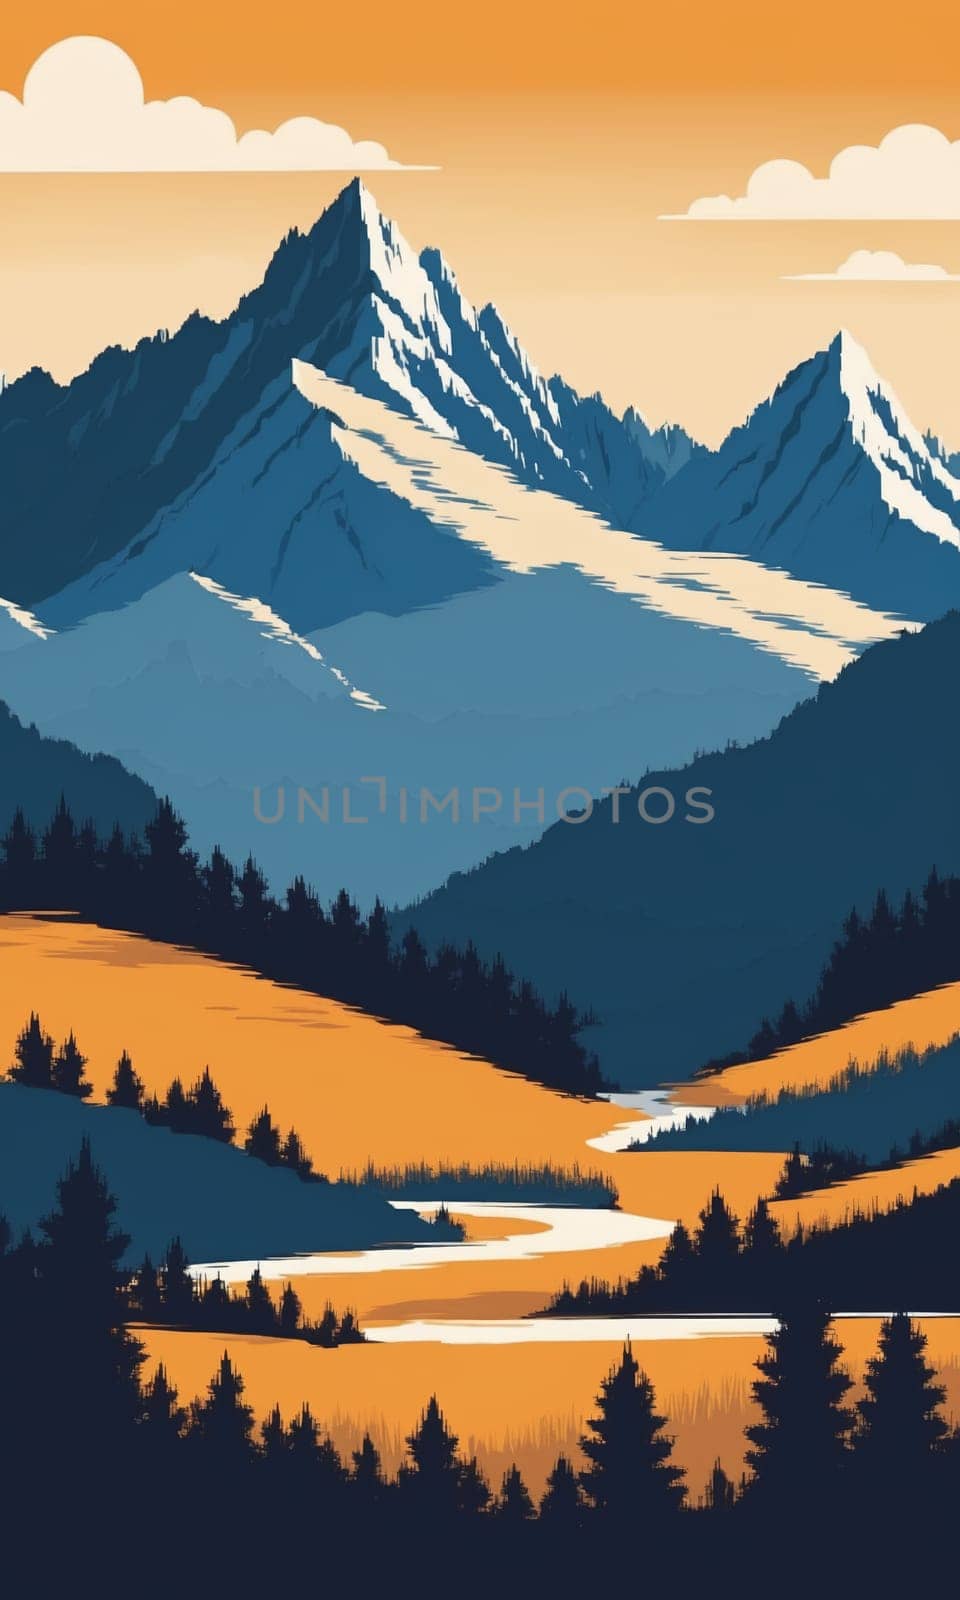 Mountain landscape with river, forest and mountains. illustration in flat style. by Andre1ns